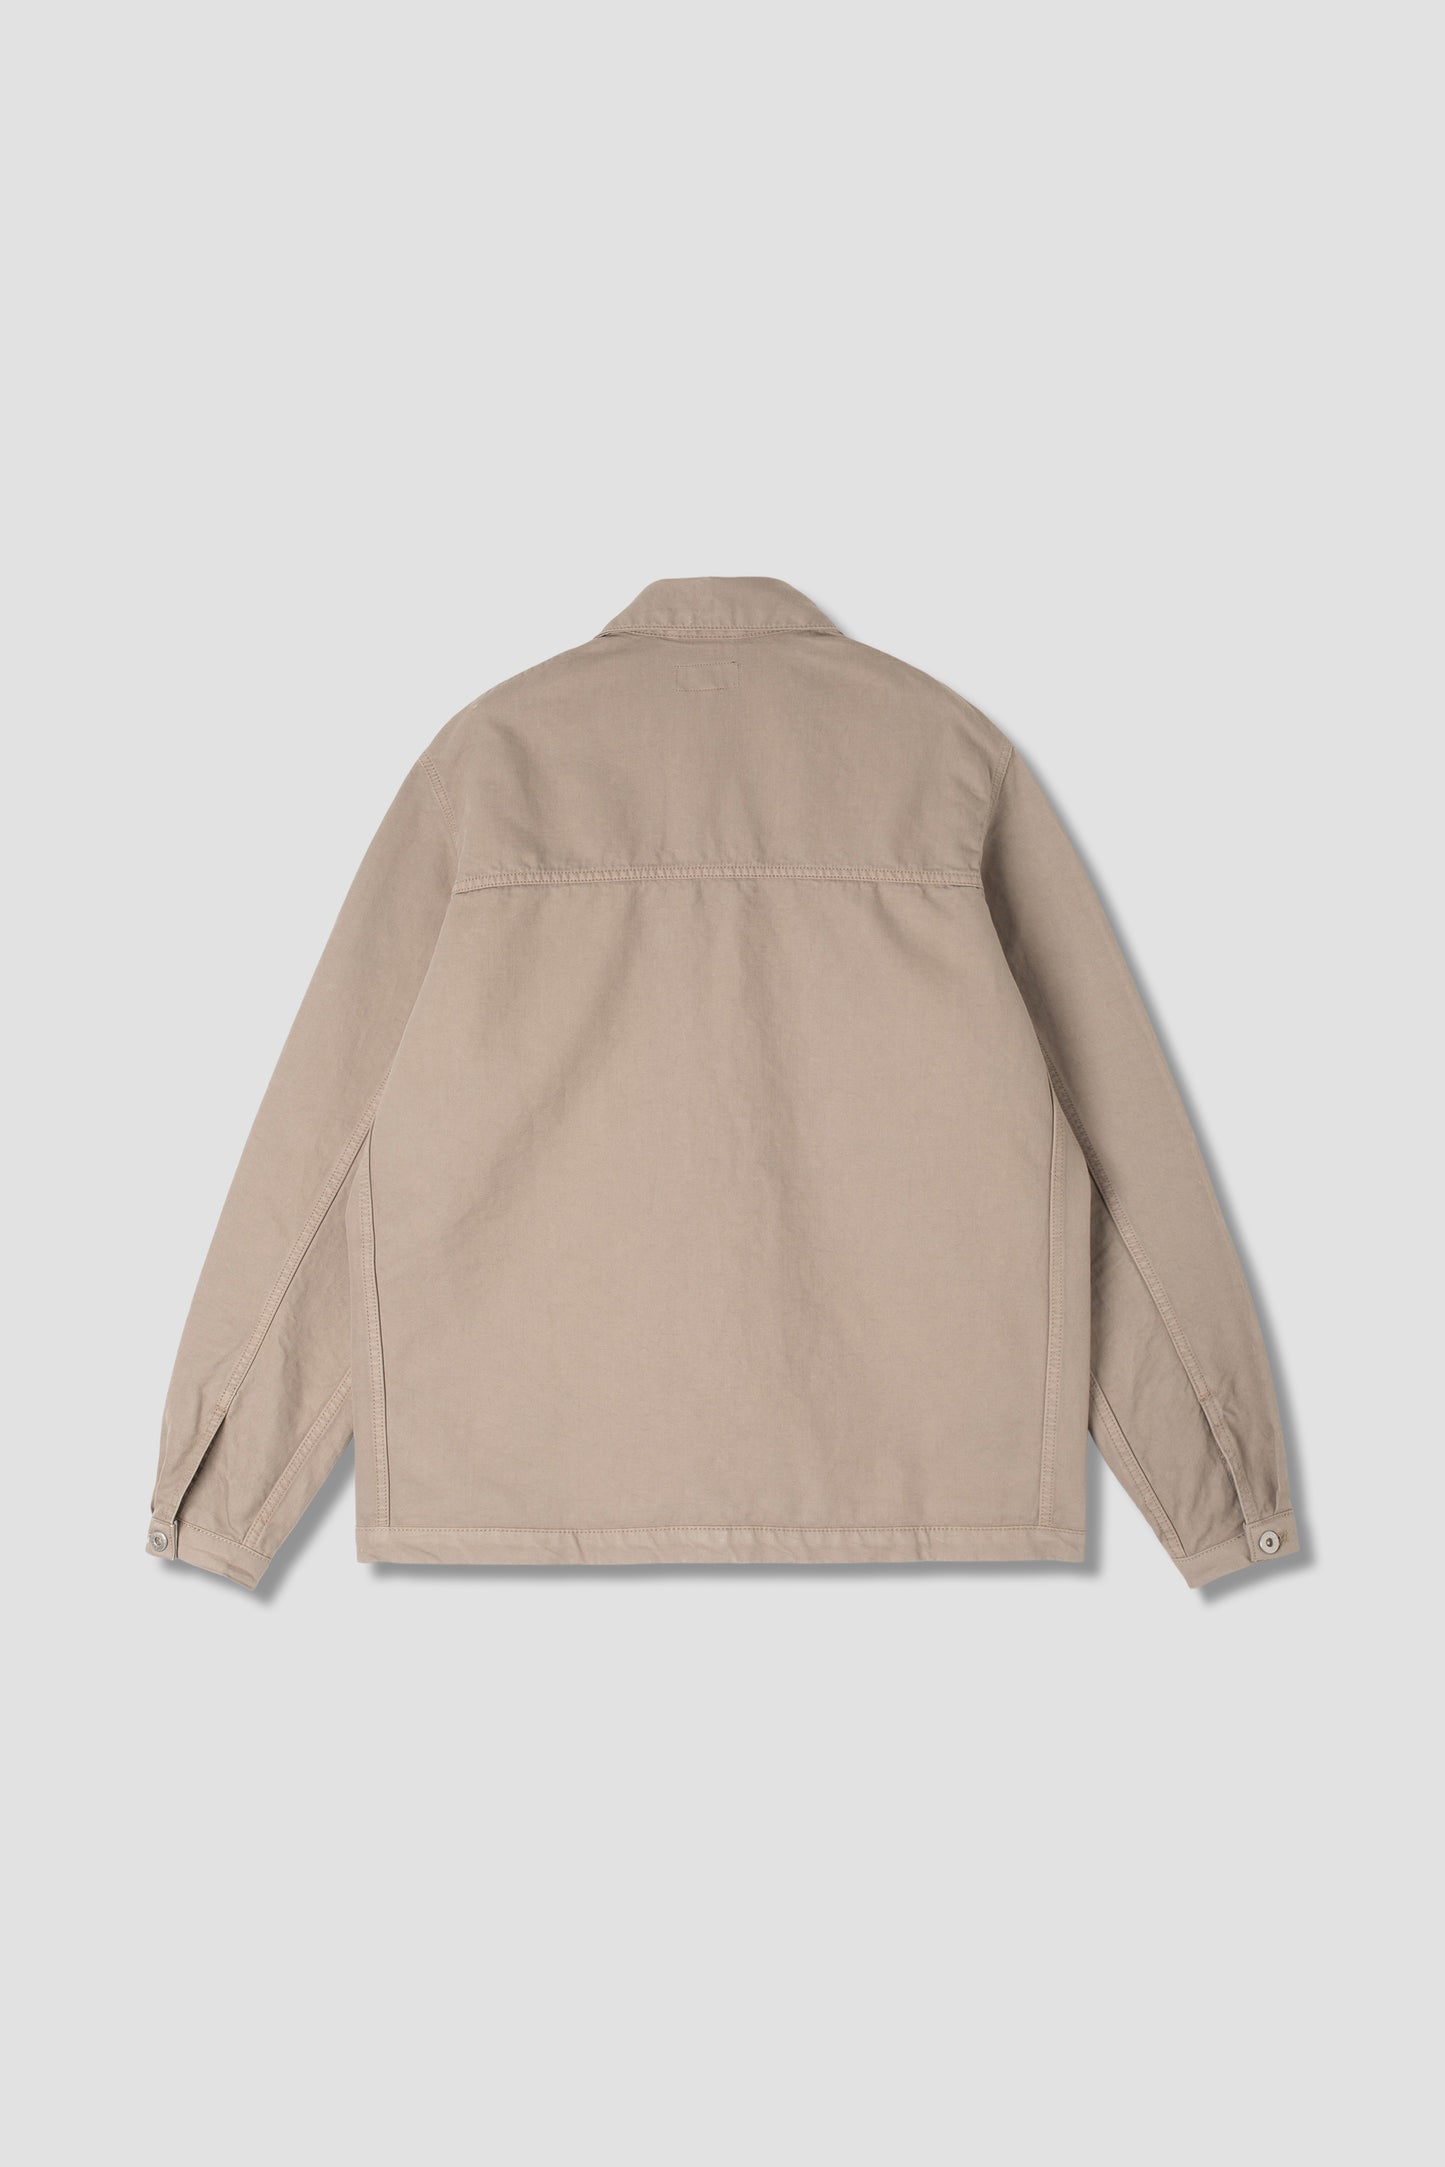 Coverall Jacket (Unlined) (Dusk Twill)